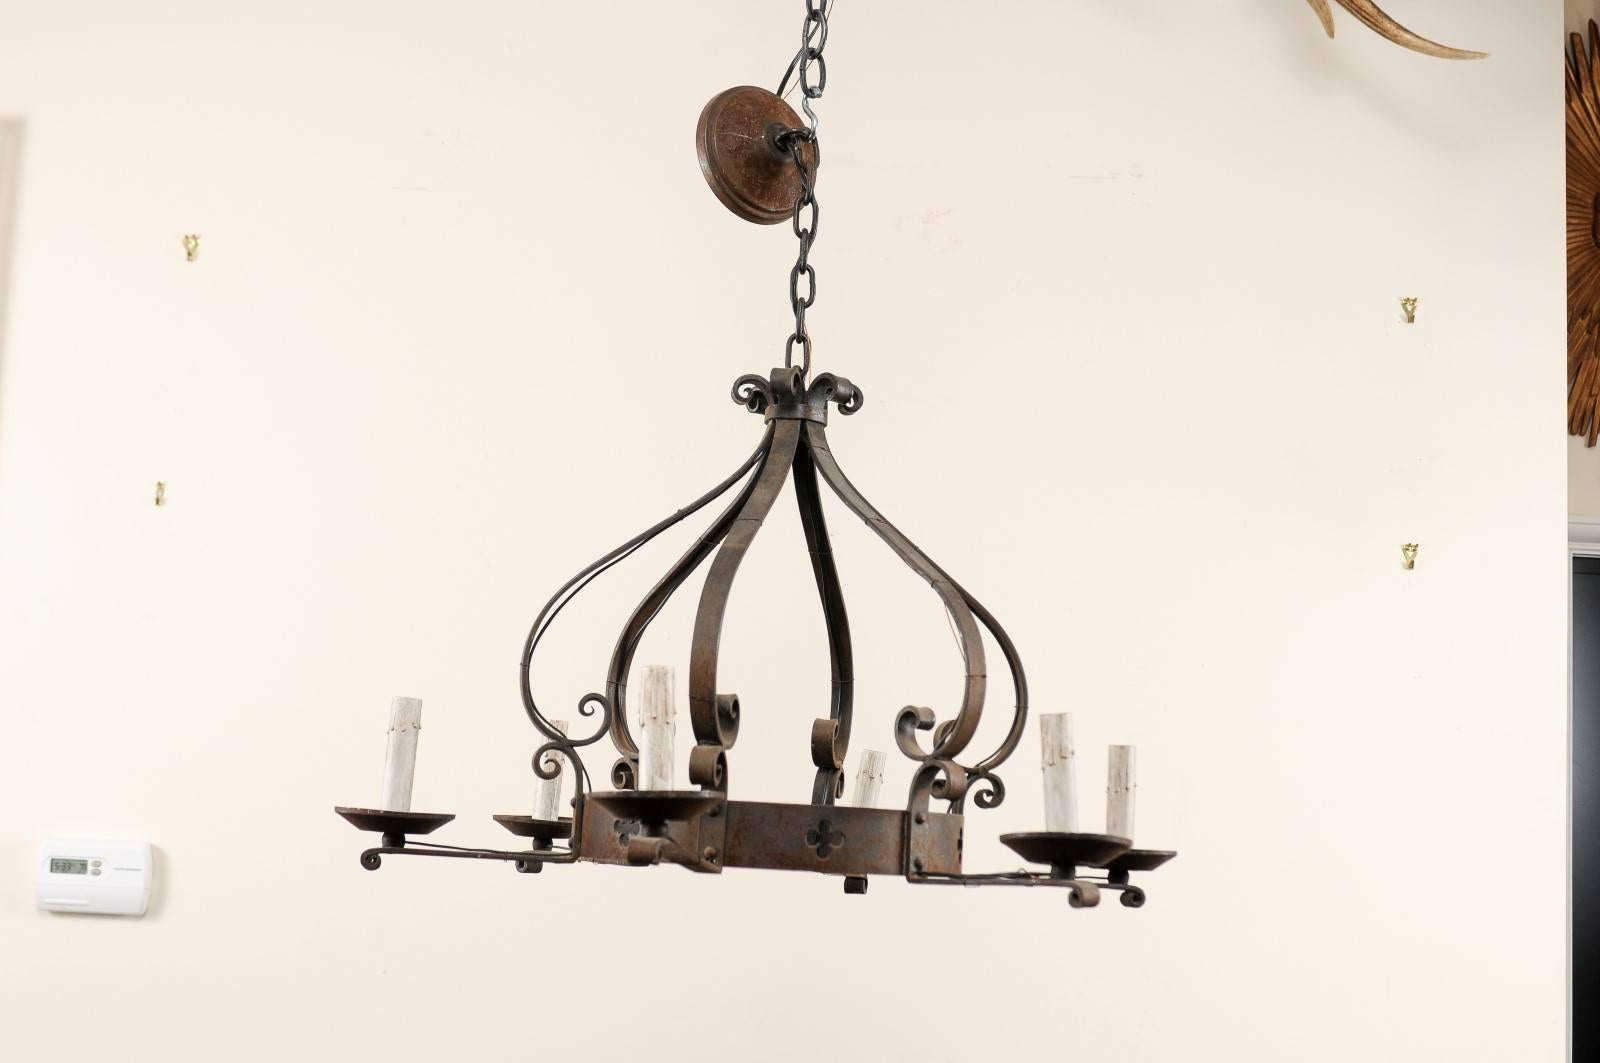 French Vintage Iron Chandelier with Crown Shape & Pierced Clover / Trefoil Decor 1